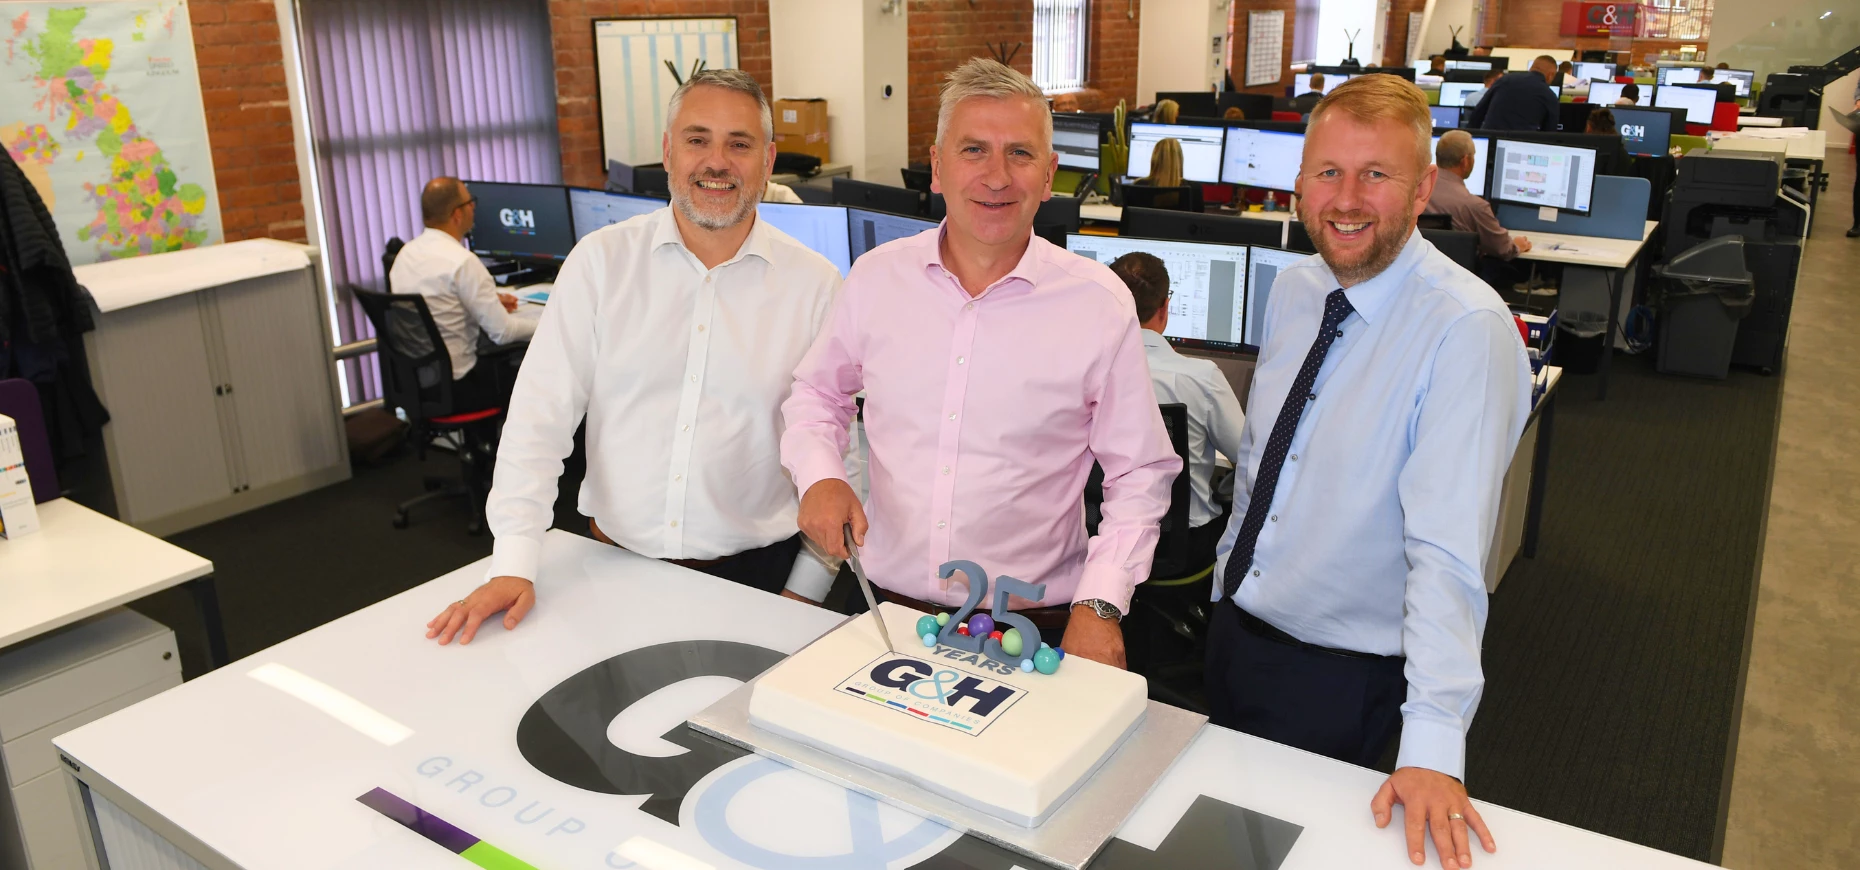 G&H Group's Pre-Construction Director David Davis, Chairman Graham Kelly, and Commercial Director Mark Craven mark the mechanical, electrical and public health service (MEP) provider's 25th anniversary. 